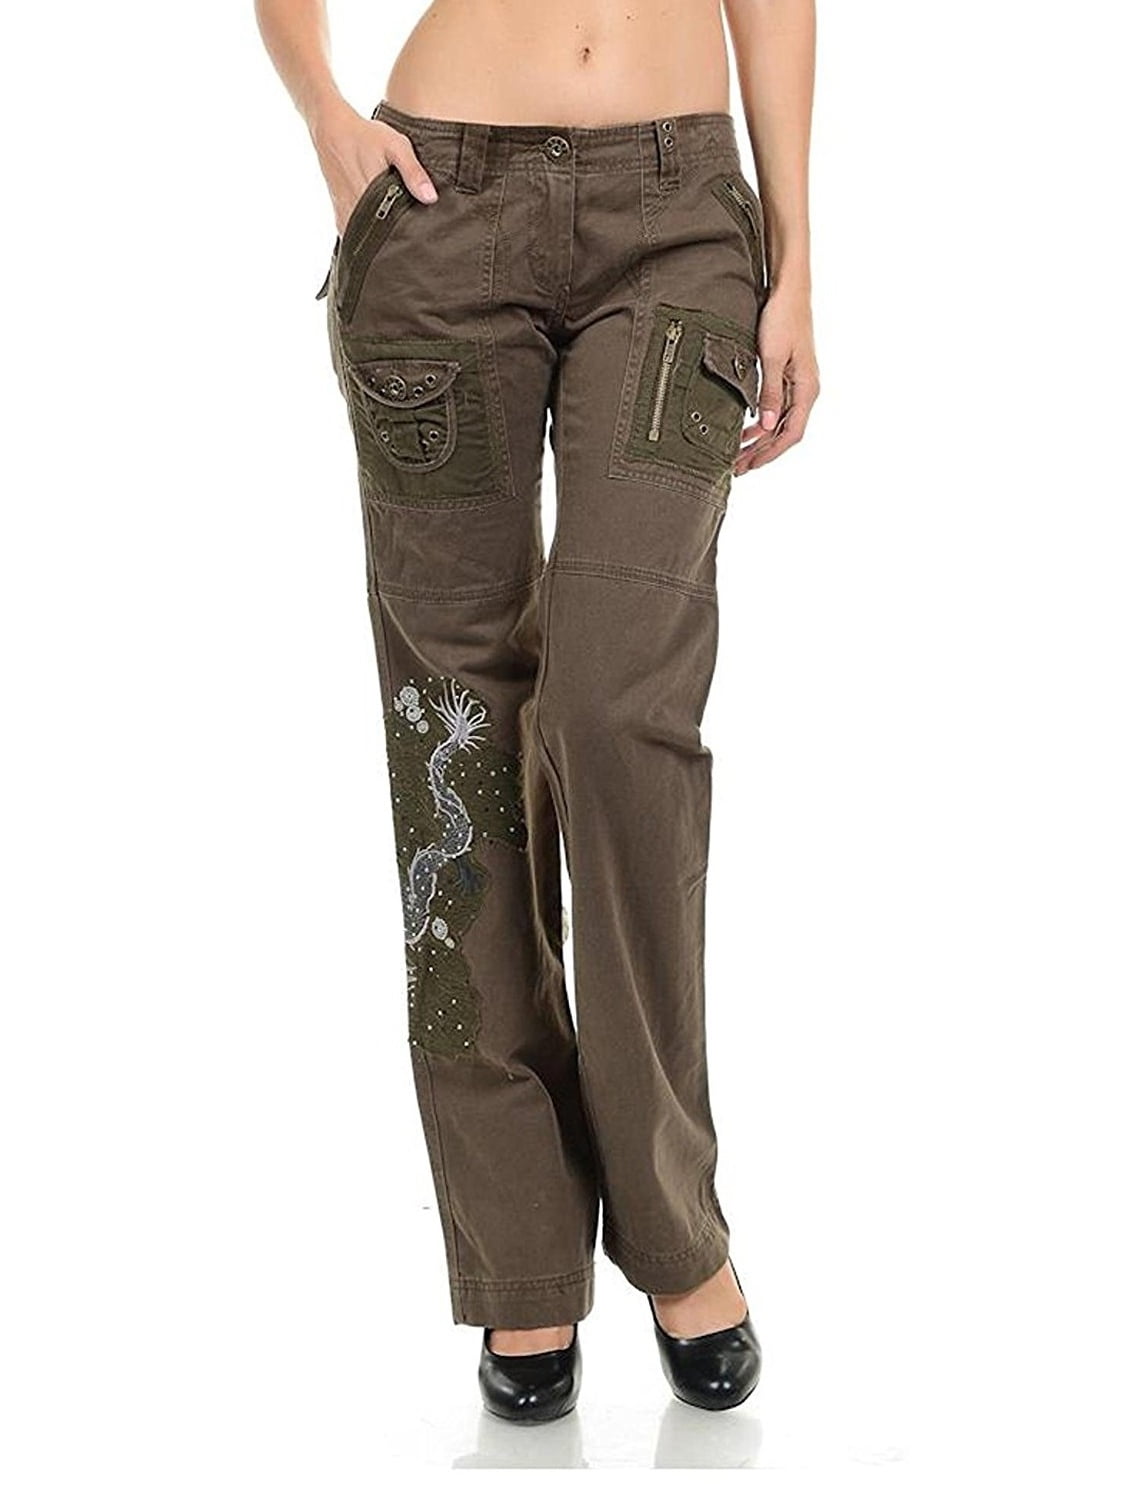 Lucy - Womens Hipster Cargo Multi Pocket Combat Trousers Leisure Army ...